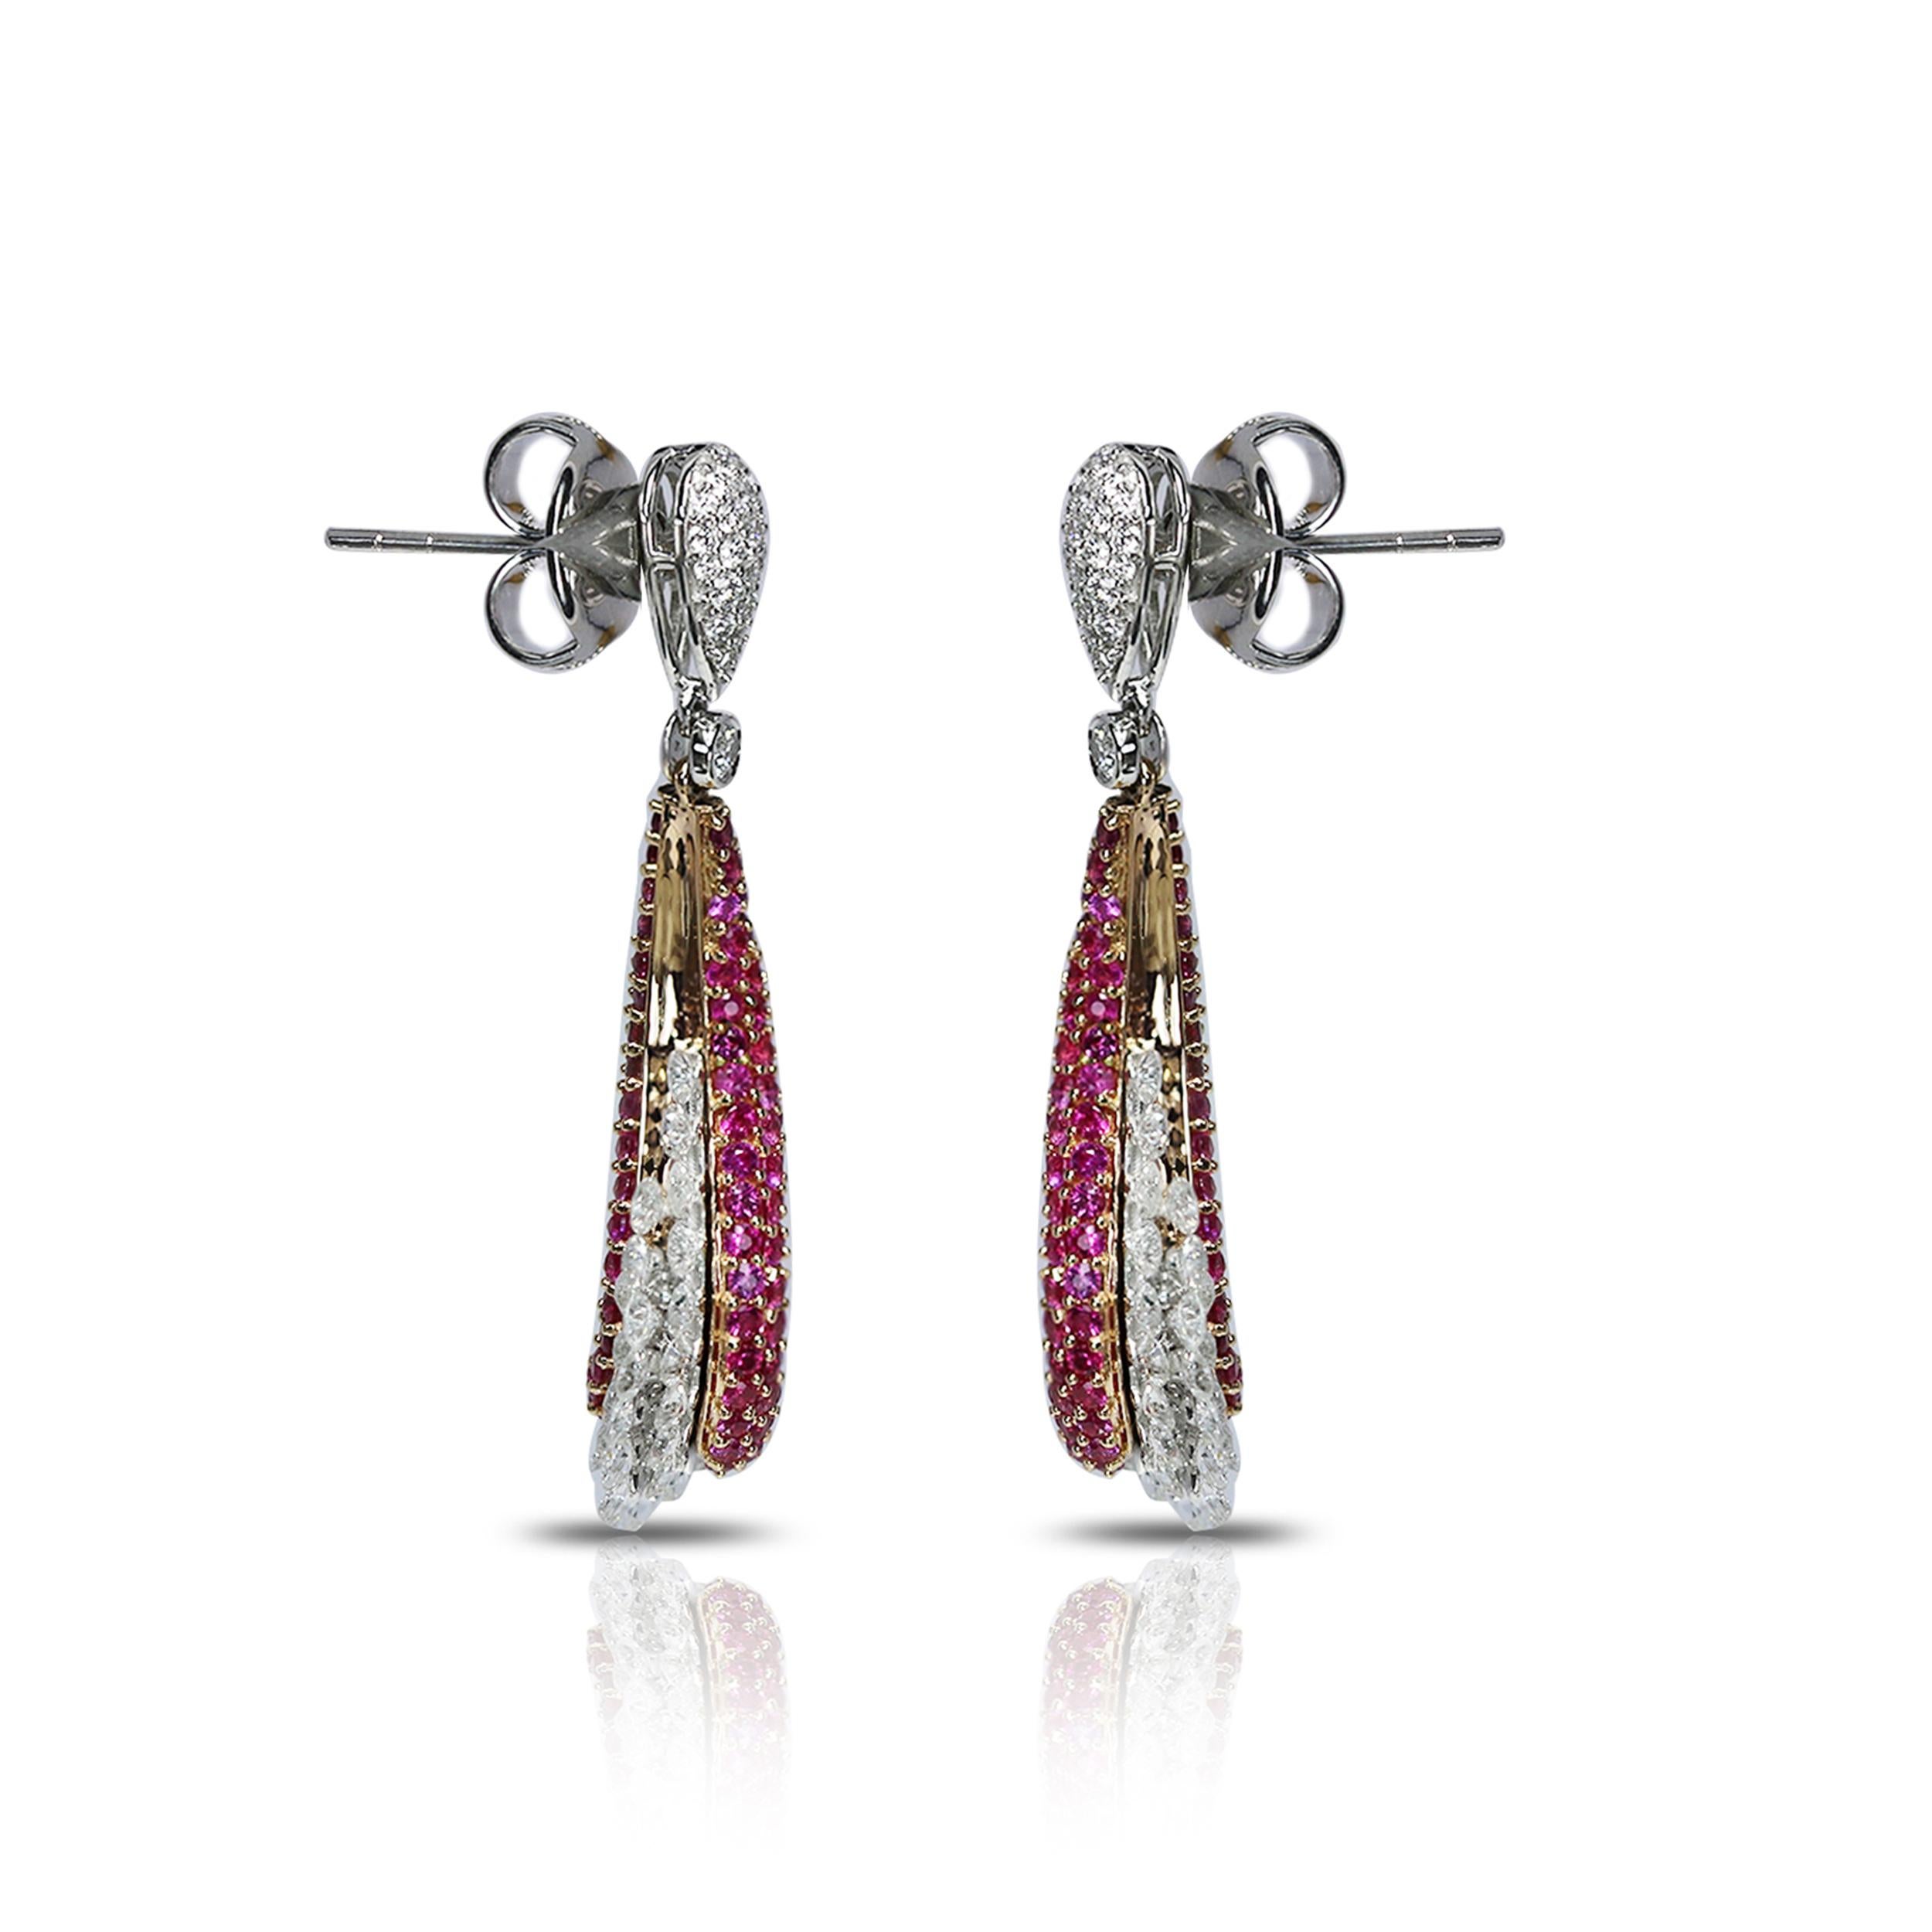 Studio Rêves 18 Karat Rose Cut Diamond and Pink Sapphire Wave Earrings In New Condition For Sale In Mumbai, Maharashtra